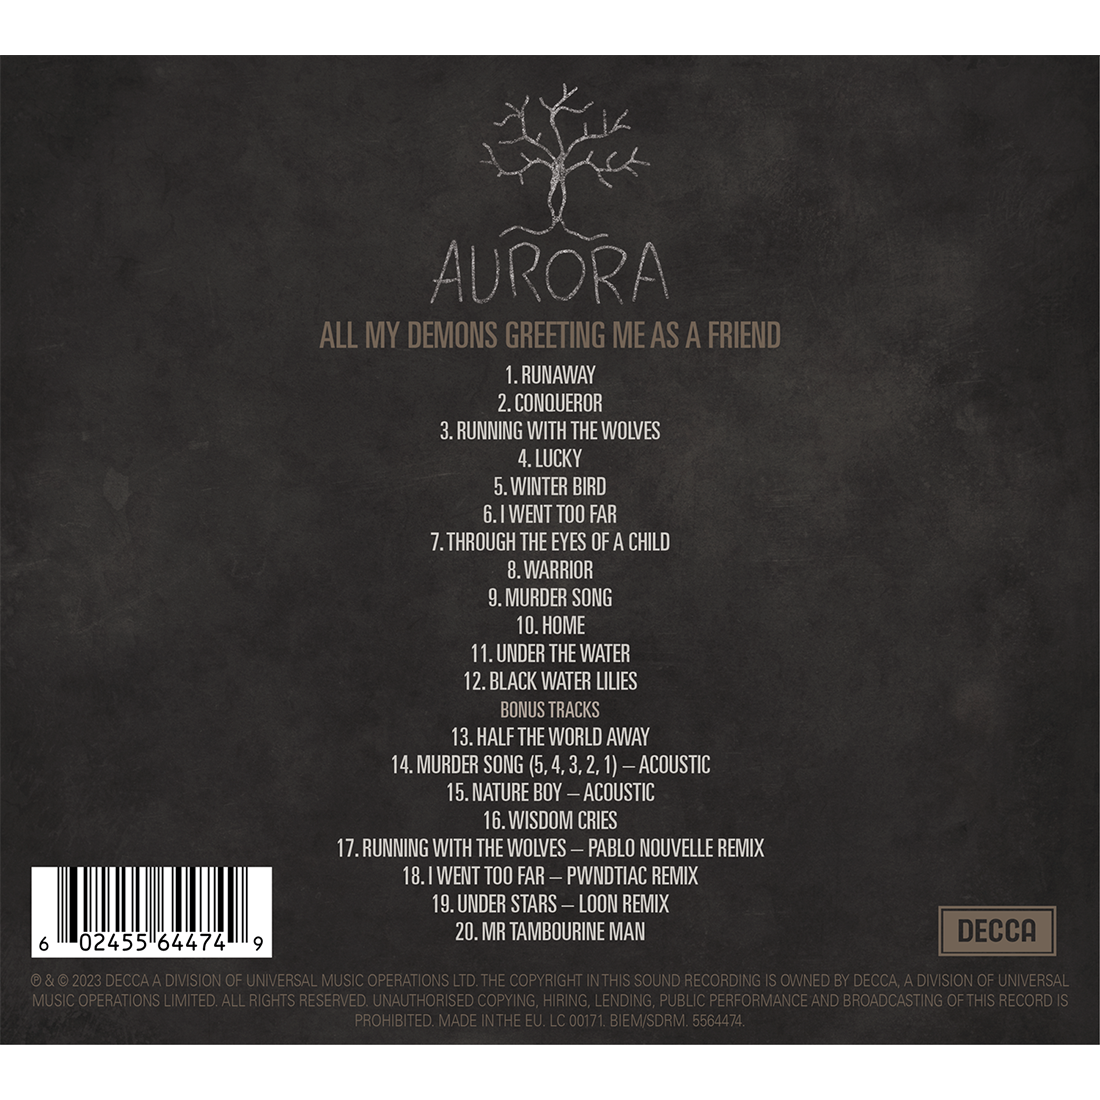 All My Demons Greeting Me As A Friend: Deluxe CD - Aurora